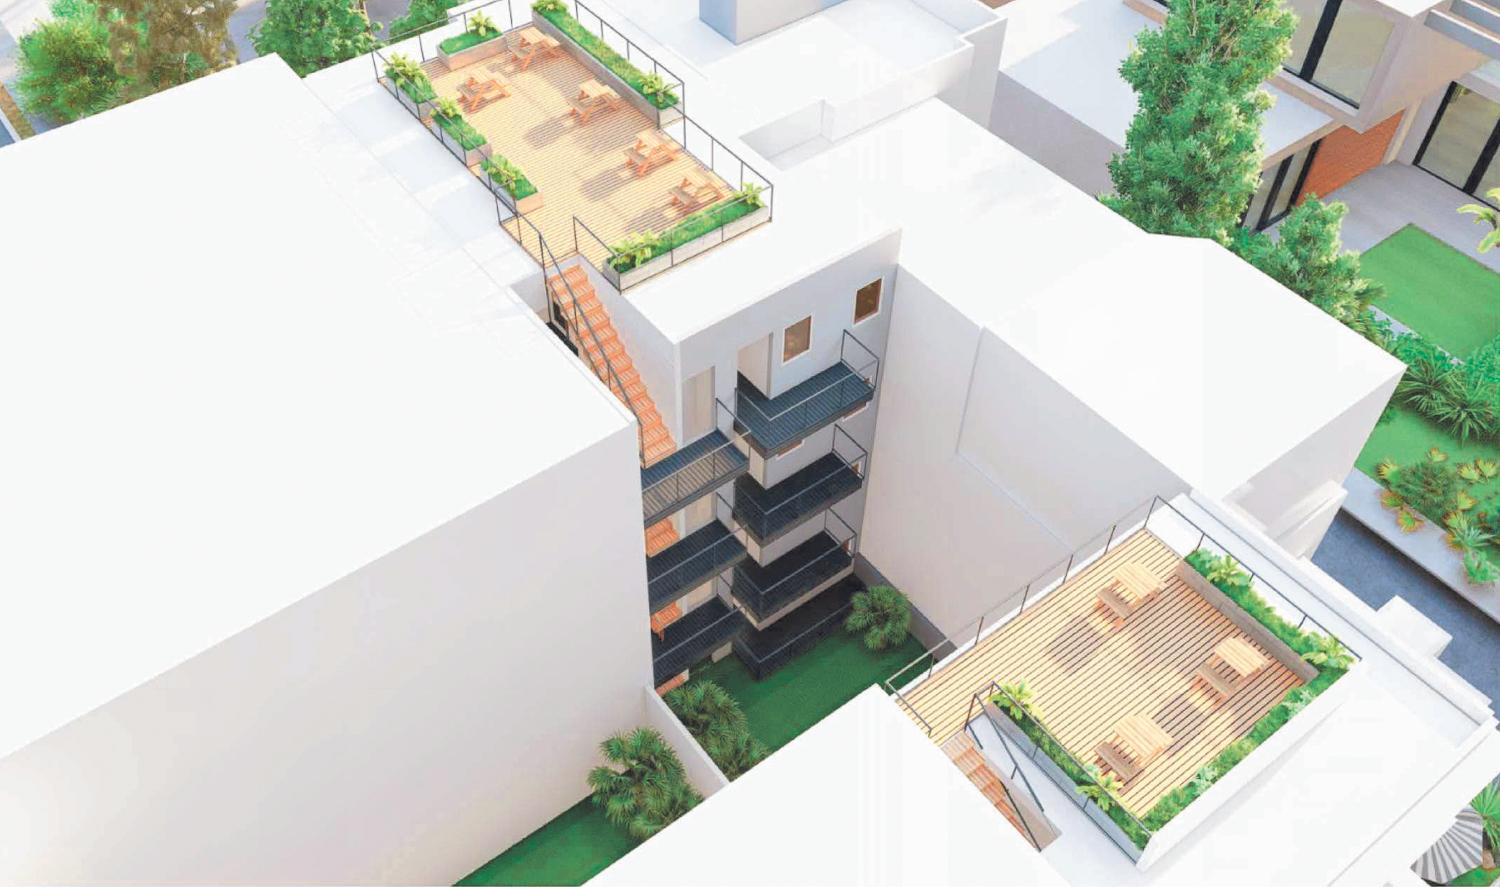 2257-2259 Bush Street aerial view looking at the central courtyard, rendering by Architects SF